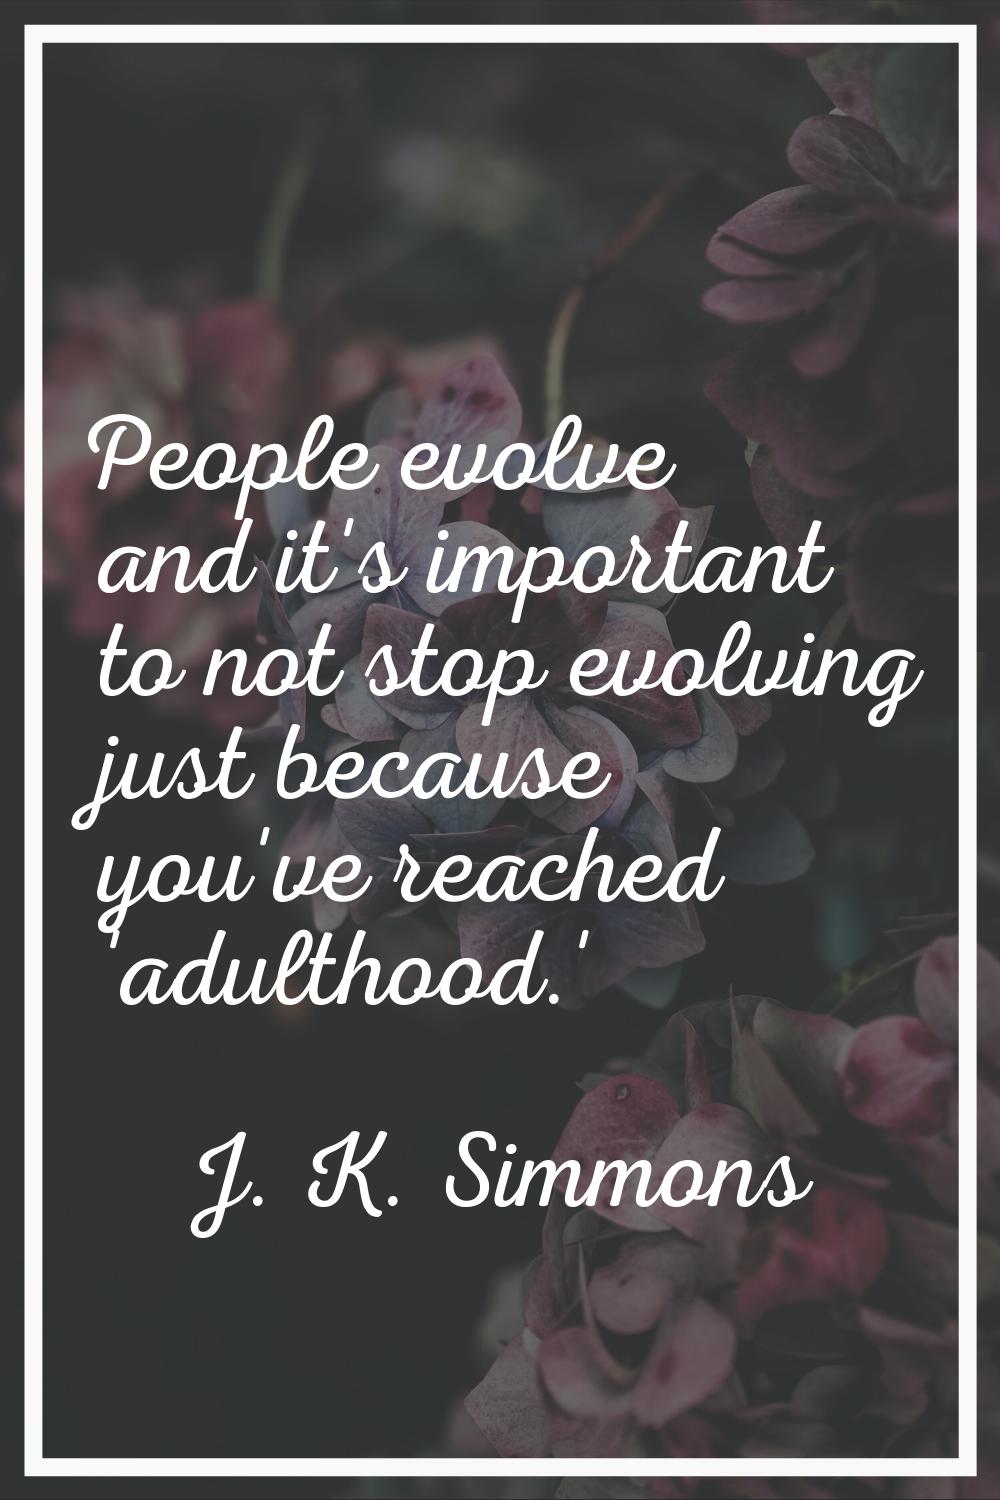 People evolve and it's important to not stop evolving just because you've reached 'adulthood.'